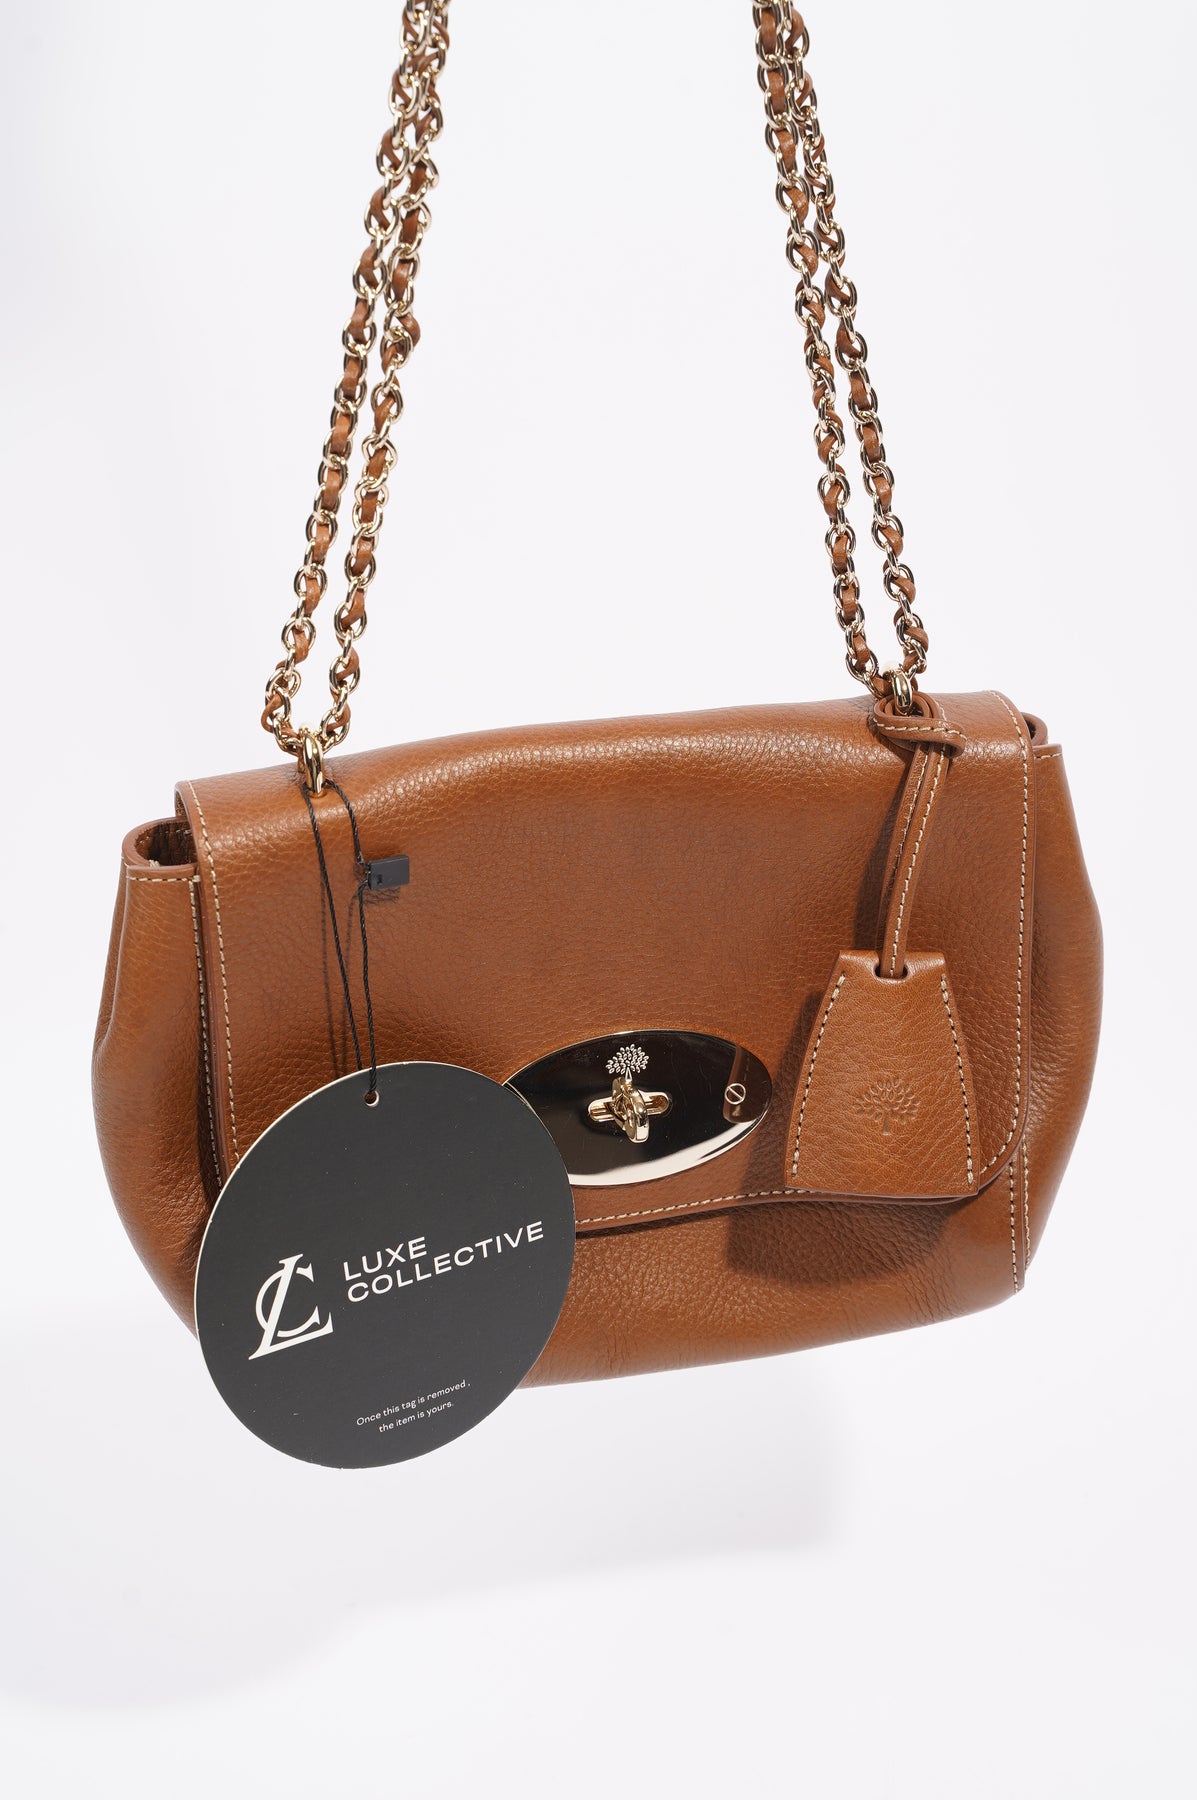 The Mulberry ALEXA - pics only | Page 12 | PurseForum